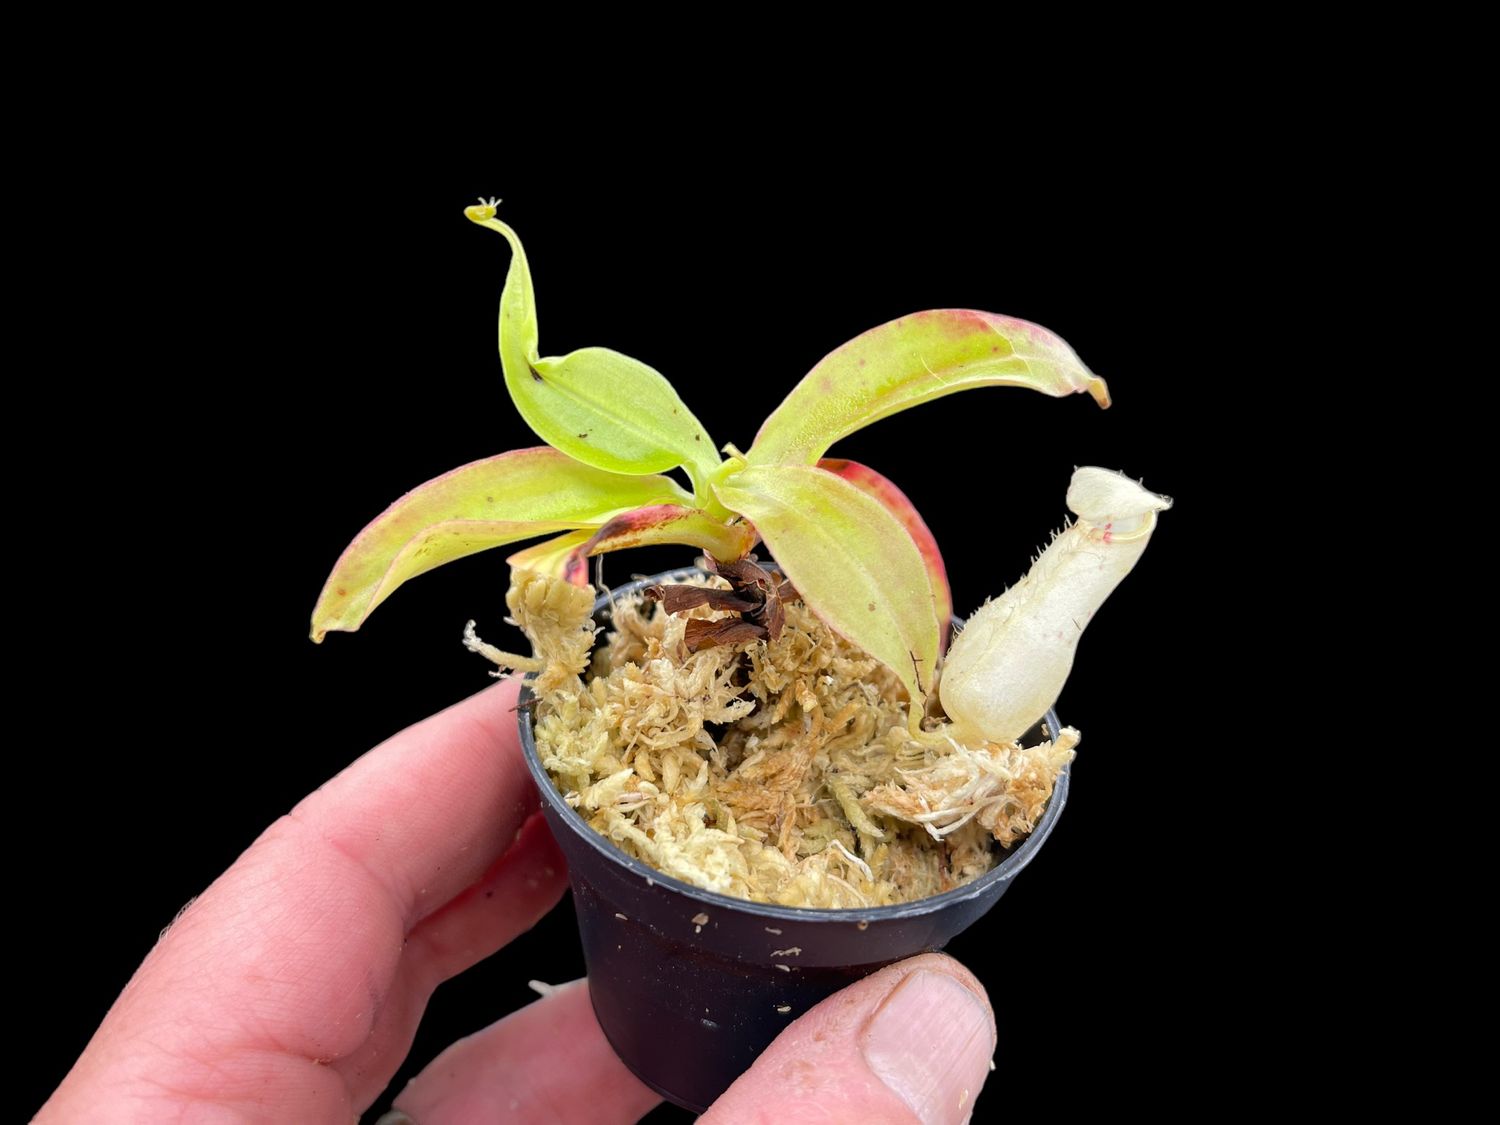 Nepenthes Nepenthes mirabilis Winged Green x northiana - Near White Pitchers! (Small)